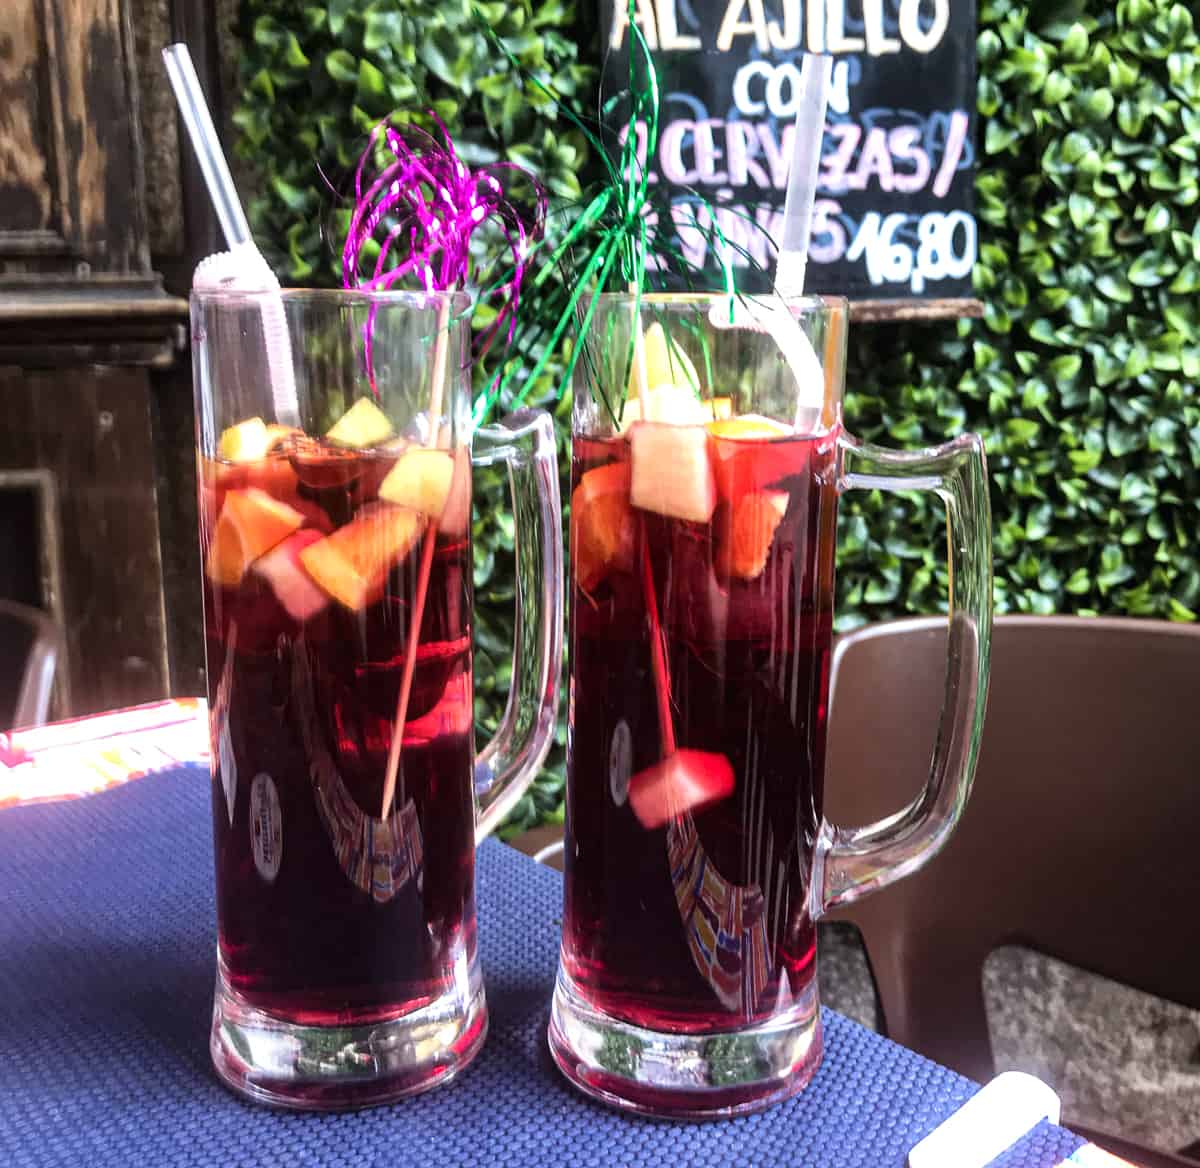 2 large glasses of red sangria on a patio table